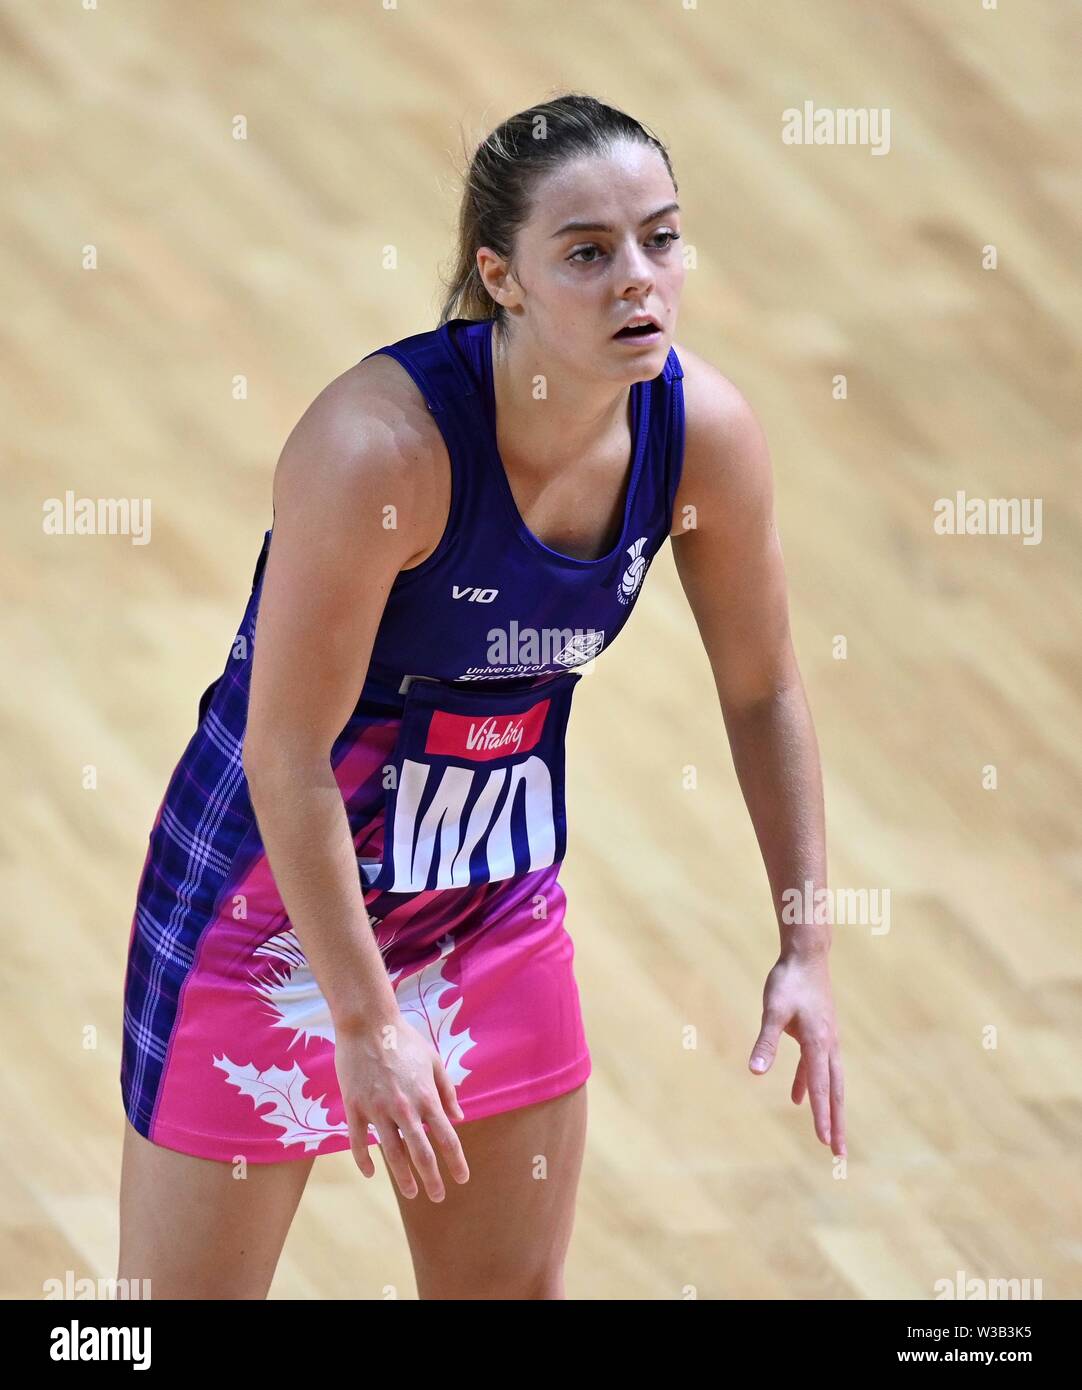 Liverpool, UK. 14 July 2019. Kelly Boyle (Scotland) during the Preliminary game between Uganda and Scotland at the Netball World Cup. M and S arena, Liverpool. Merseyside. UK. Credit Garry Bowdenh/SIP photo agency/Alamy live news. Stock Photo